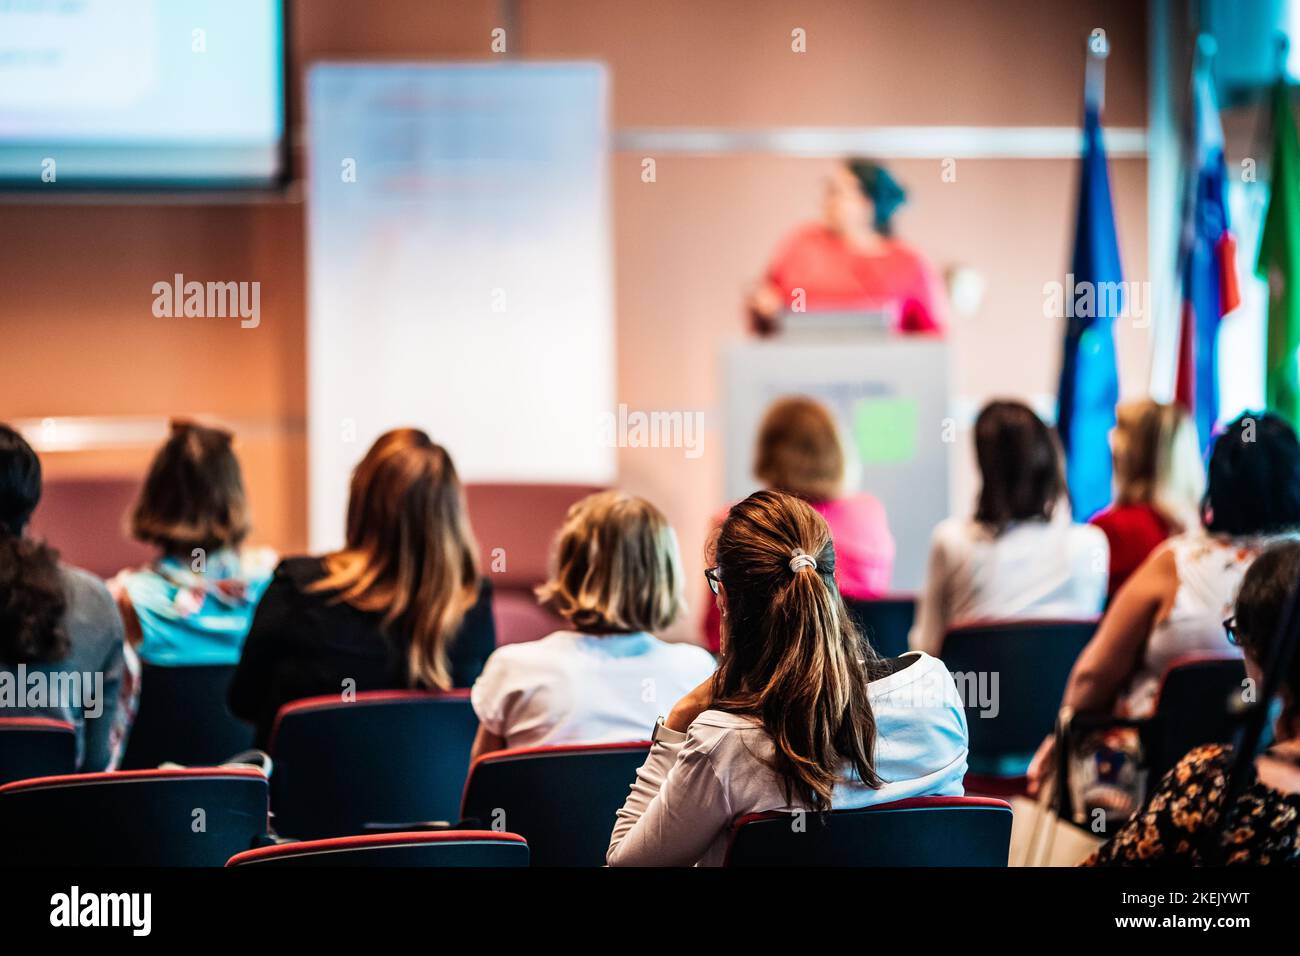 Business and entrepreneurship symposium. Female speaker giving a talk at business meeting. Audience in conference hall. Rear view of unrecognized participant in audience. Stock Photo